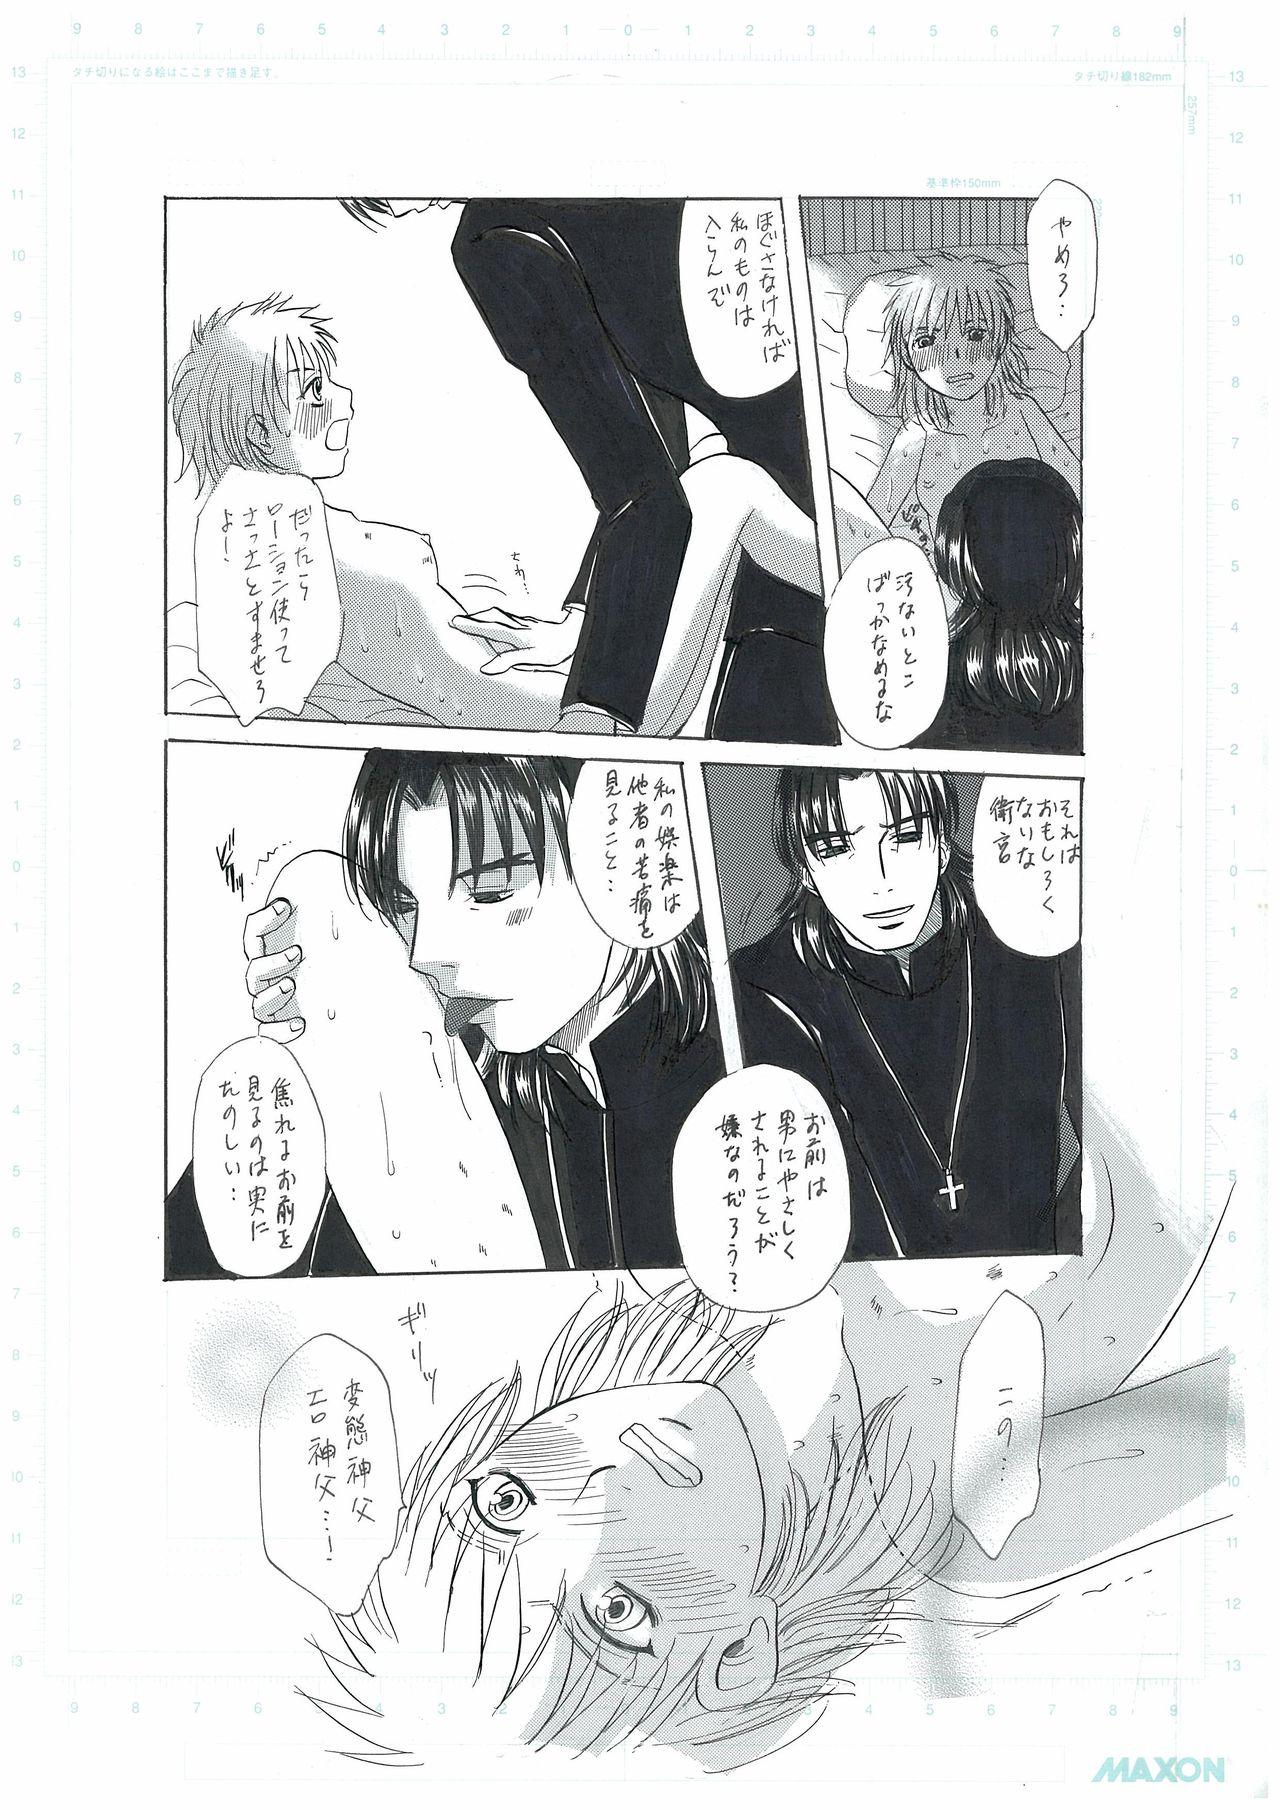 Style 彼女の願い - Fate stay night Balls - Page 9